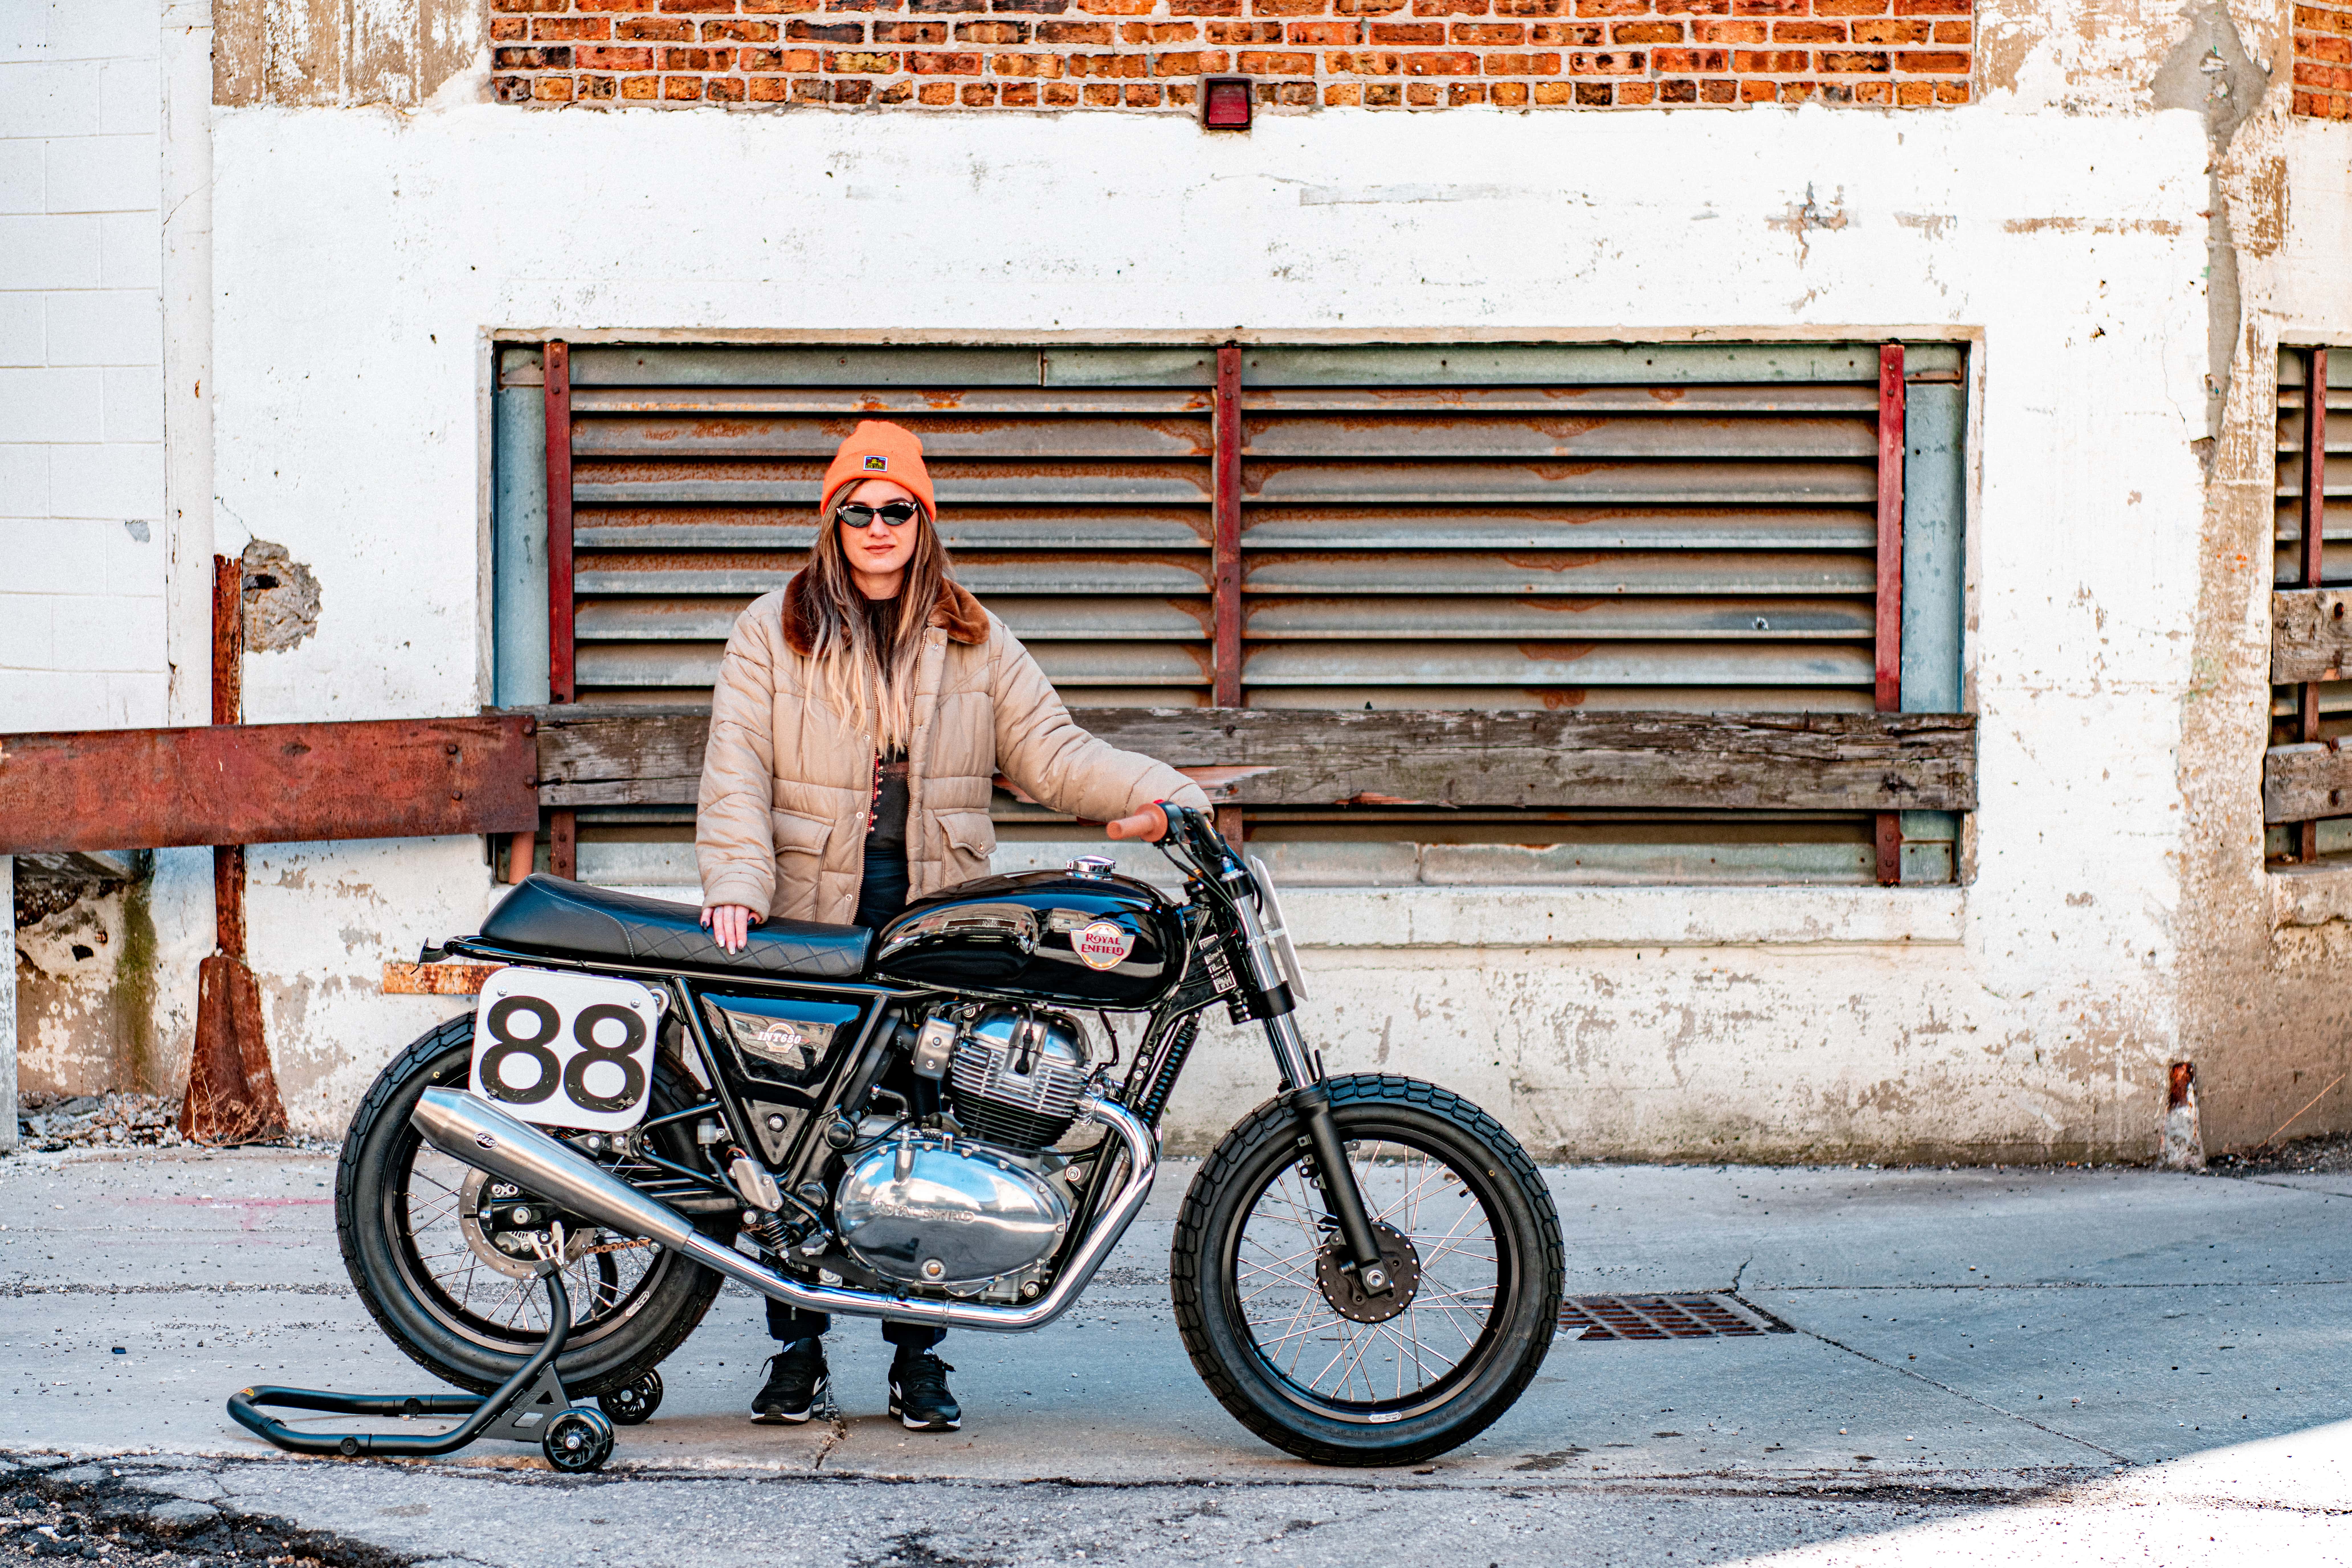 Lanakila Macnaughton with her Royal Enfield as part of the Build Train Race program at the bikes' debut in Milwaukee